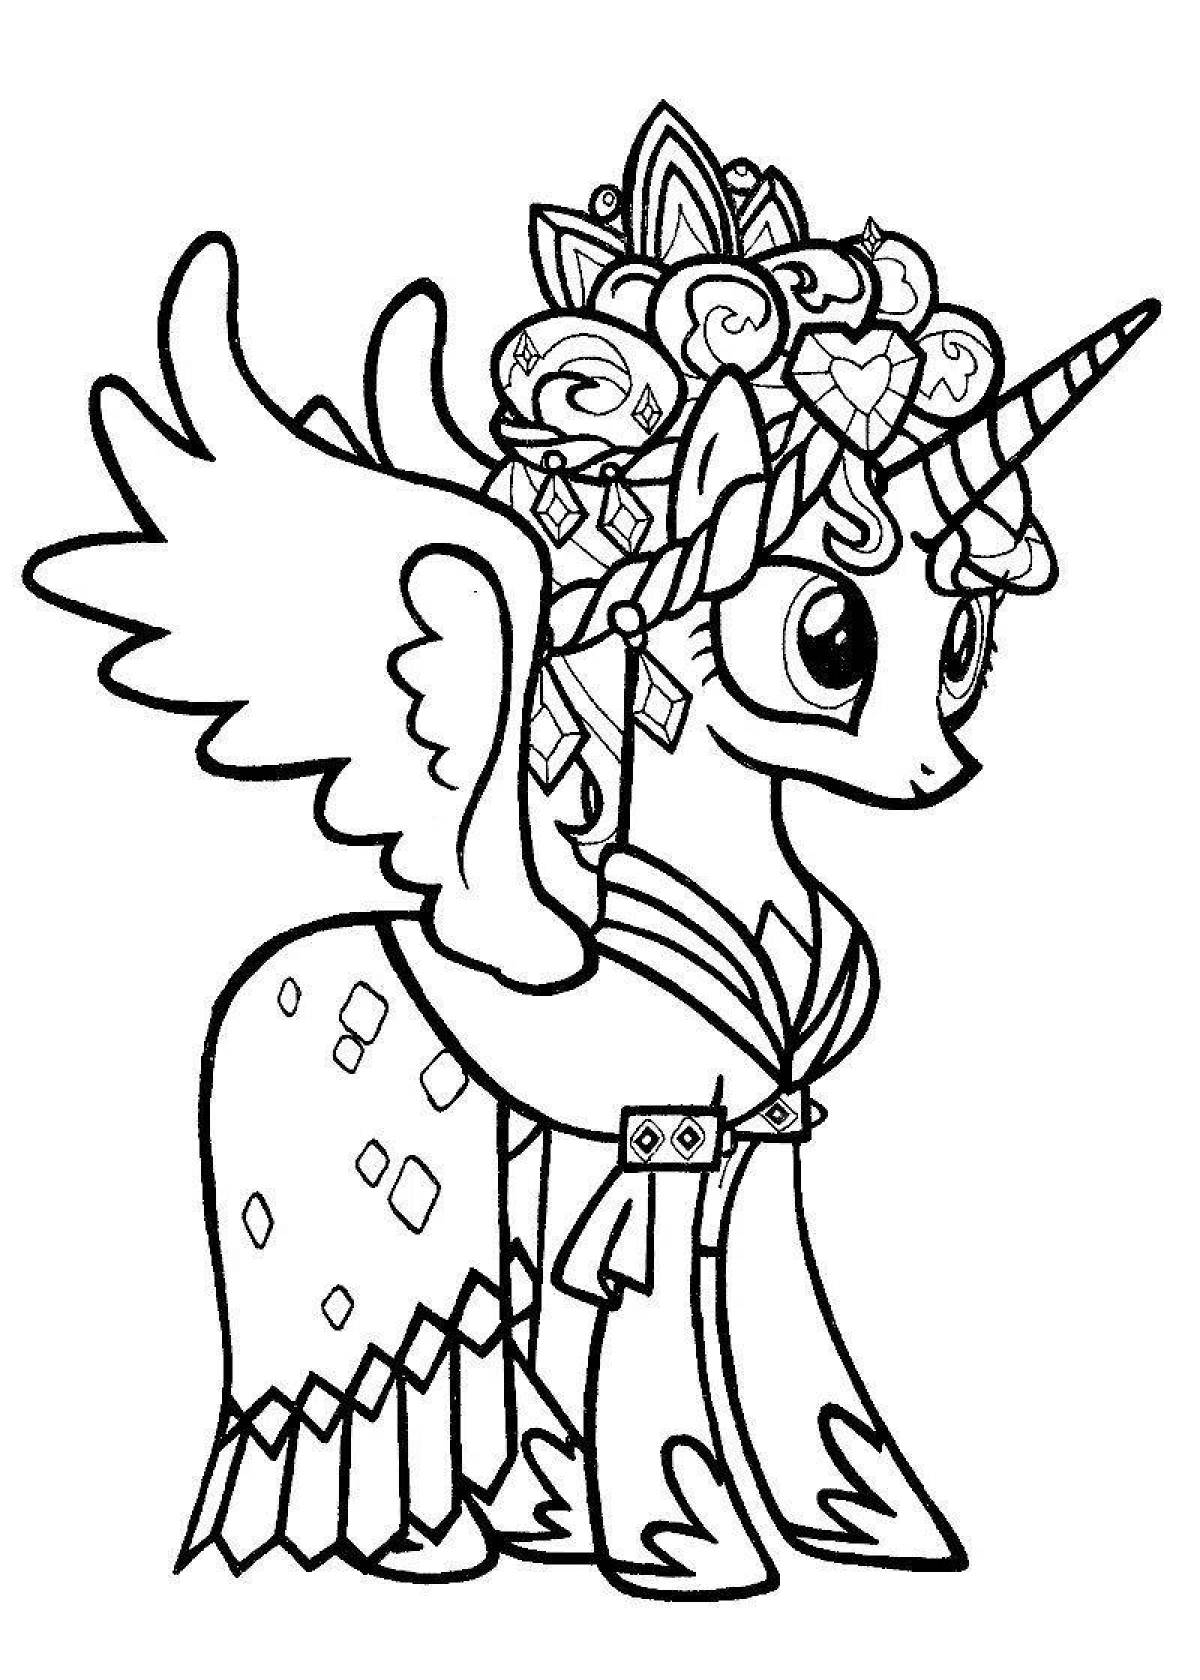 Sparkly cadence coloring page